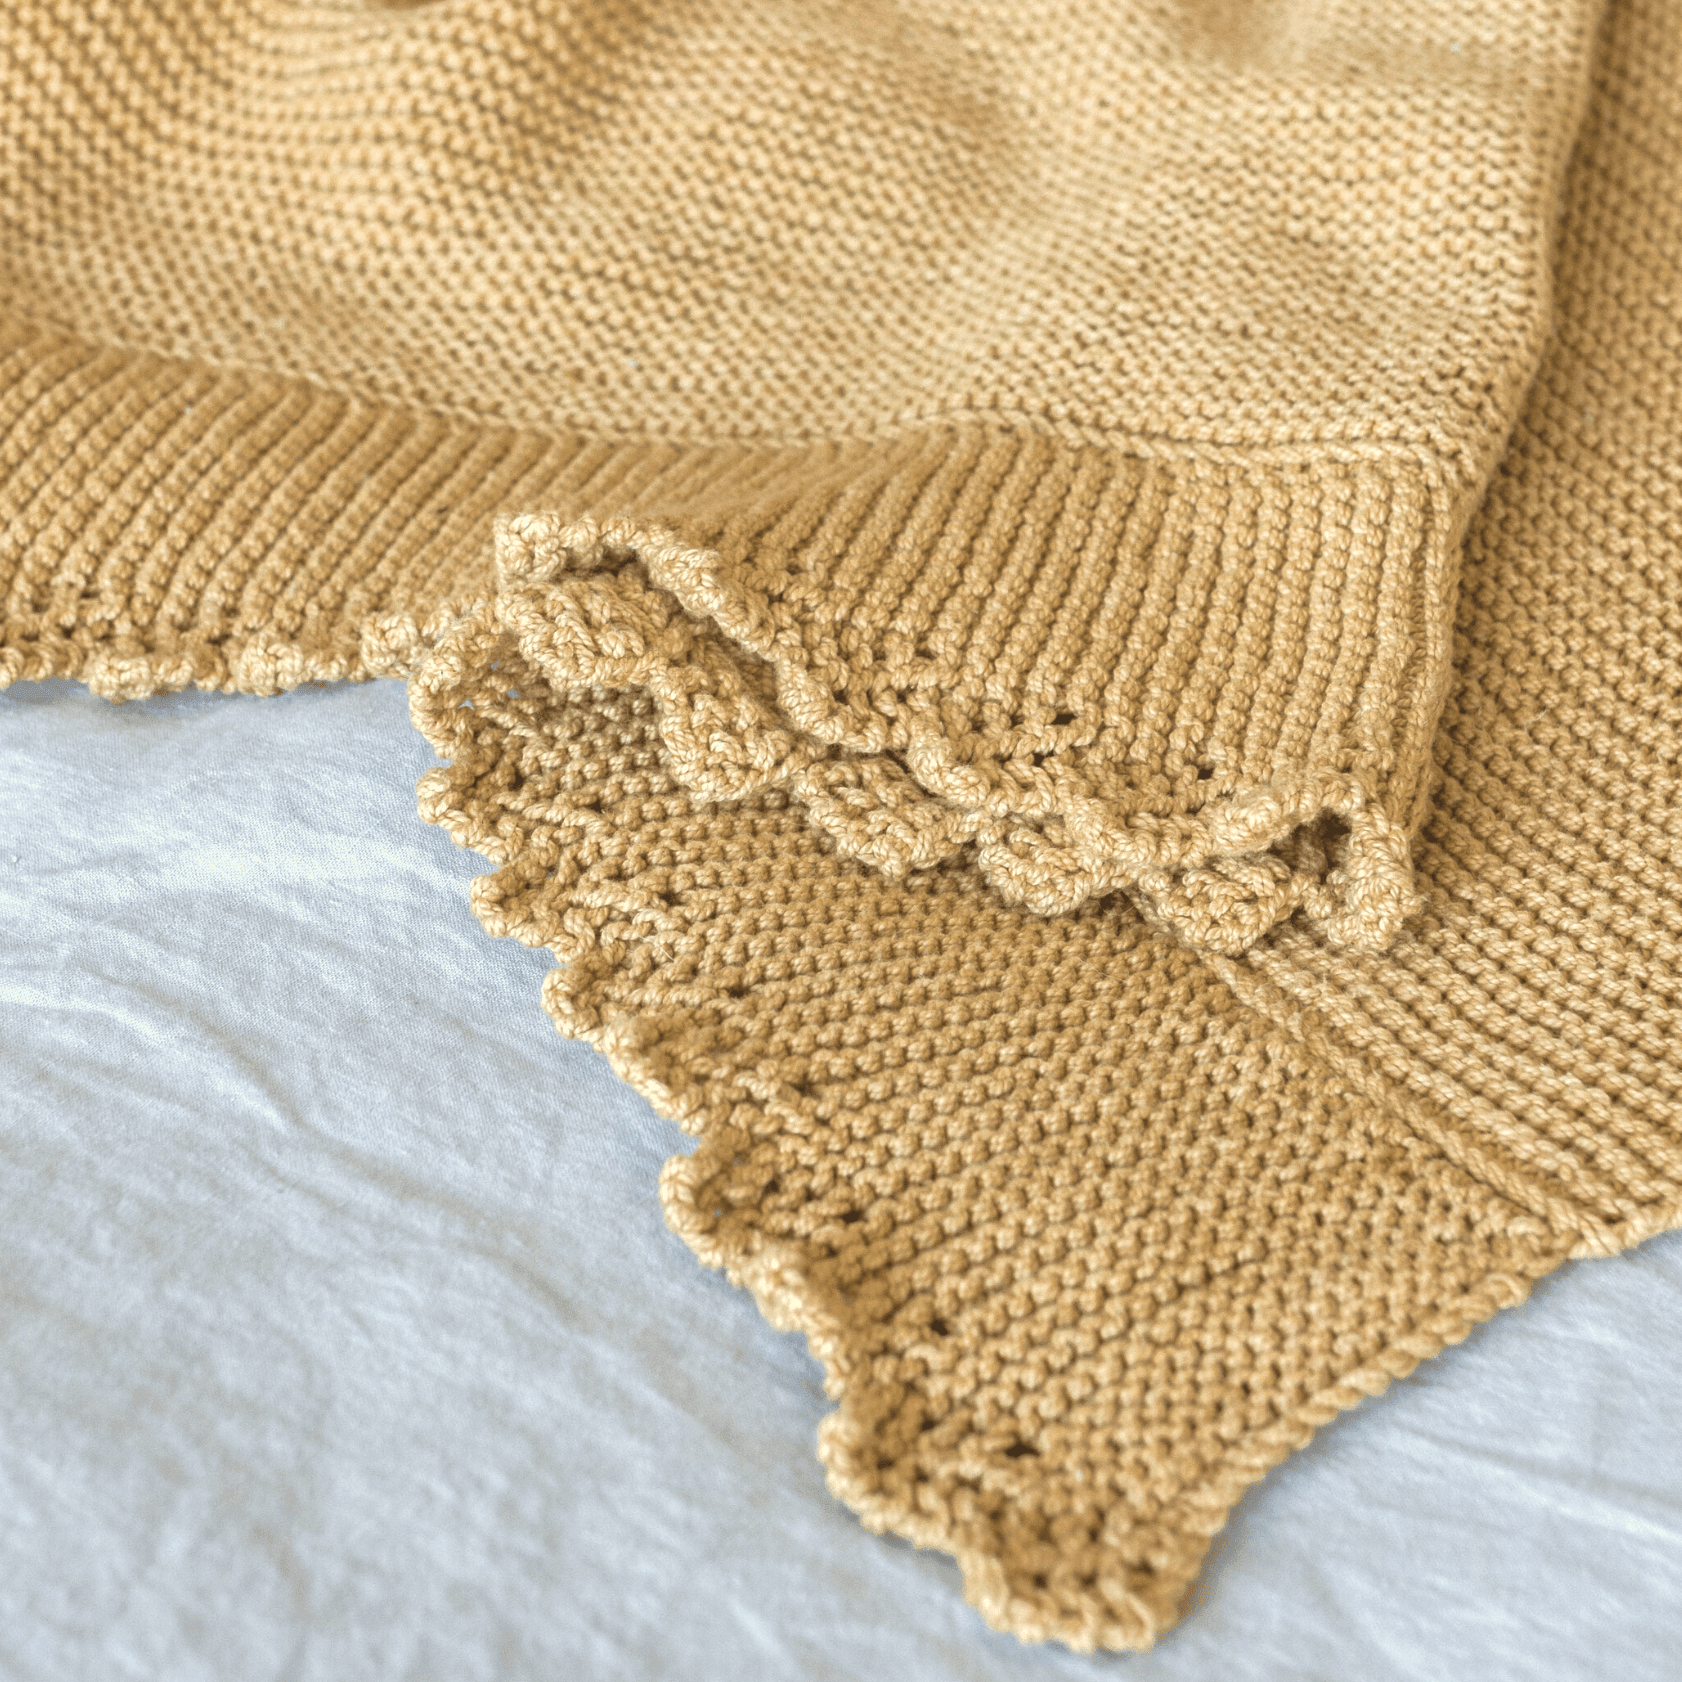 Lace Edged Throw kanju interiors African décor handmade natural organic accent throw blanket decorative lounge comfortable comfy unique modern contemporary stylish soft durable minimal couch chair bed luxury hand made home good gift decoration simplicity durable functional South Africa woven knitted cotton eco-cotton old gold mustard yellow